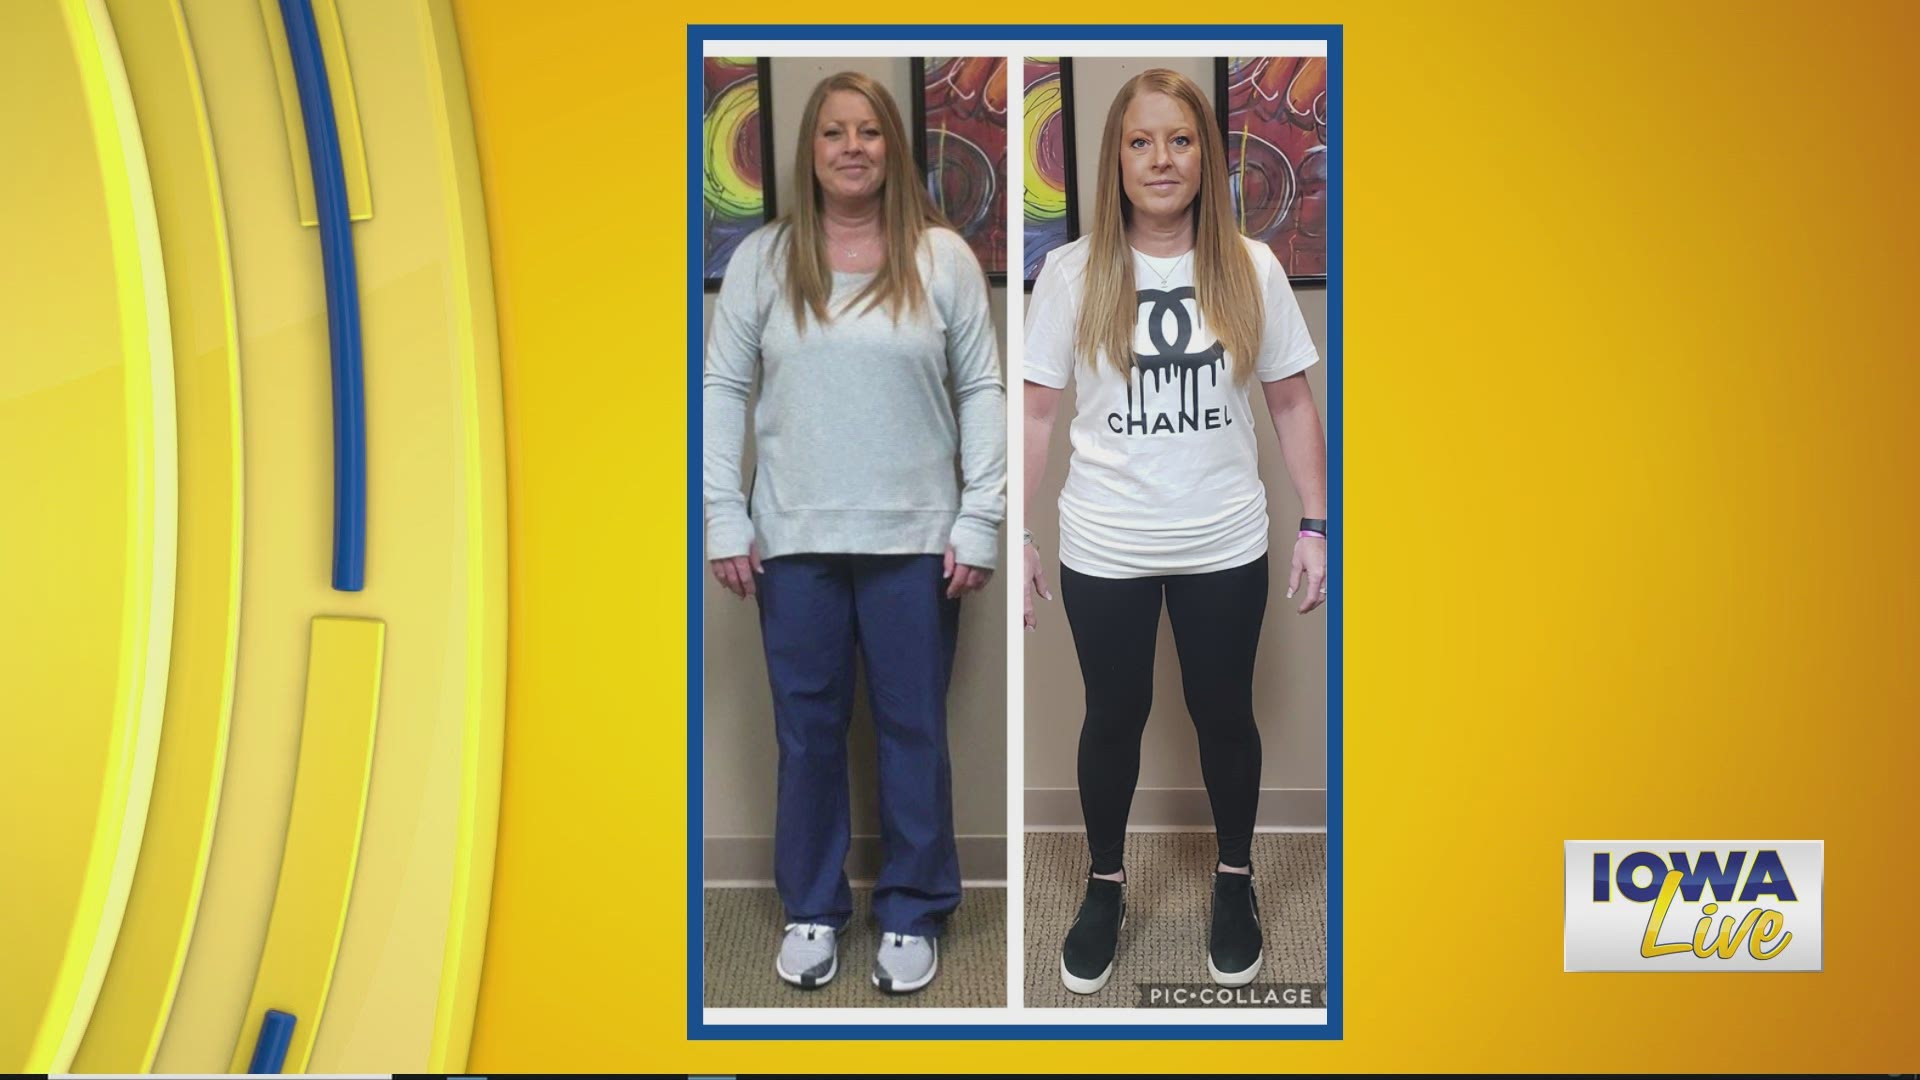 Meet Krissy who has lost 23 pounds already with Dr. Hassel's program